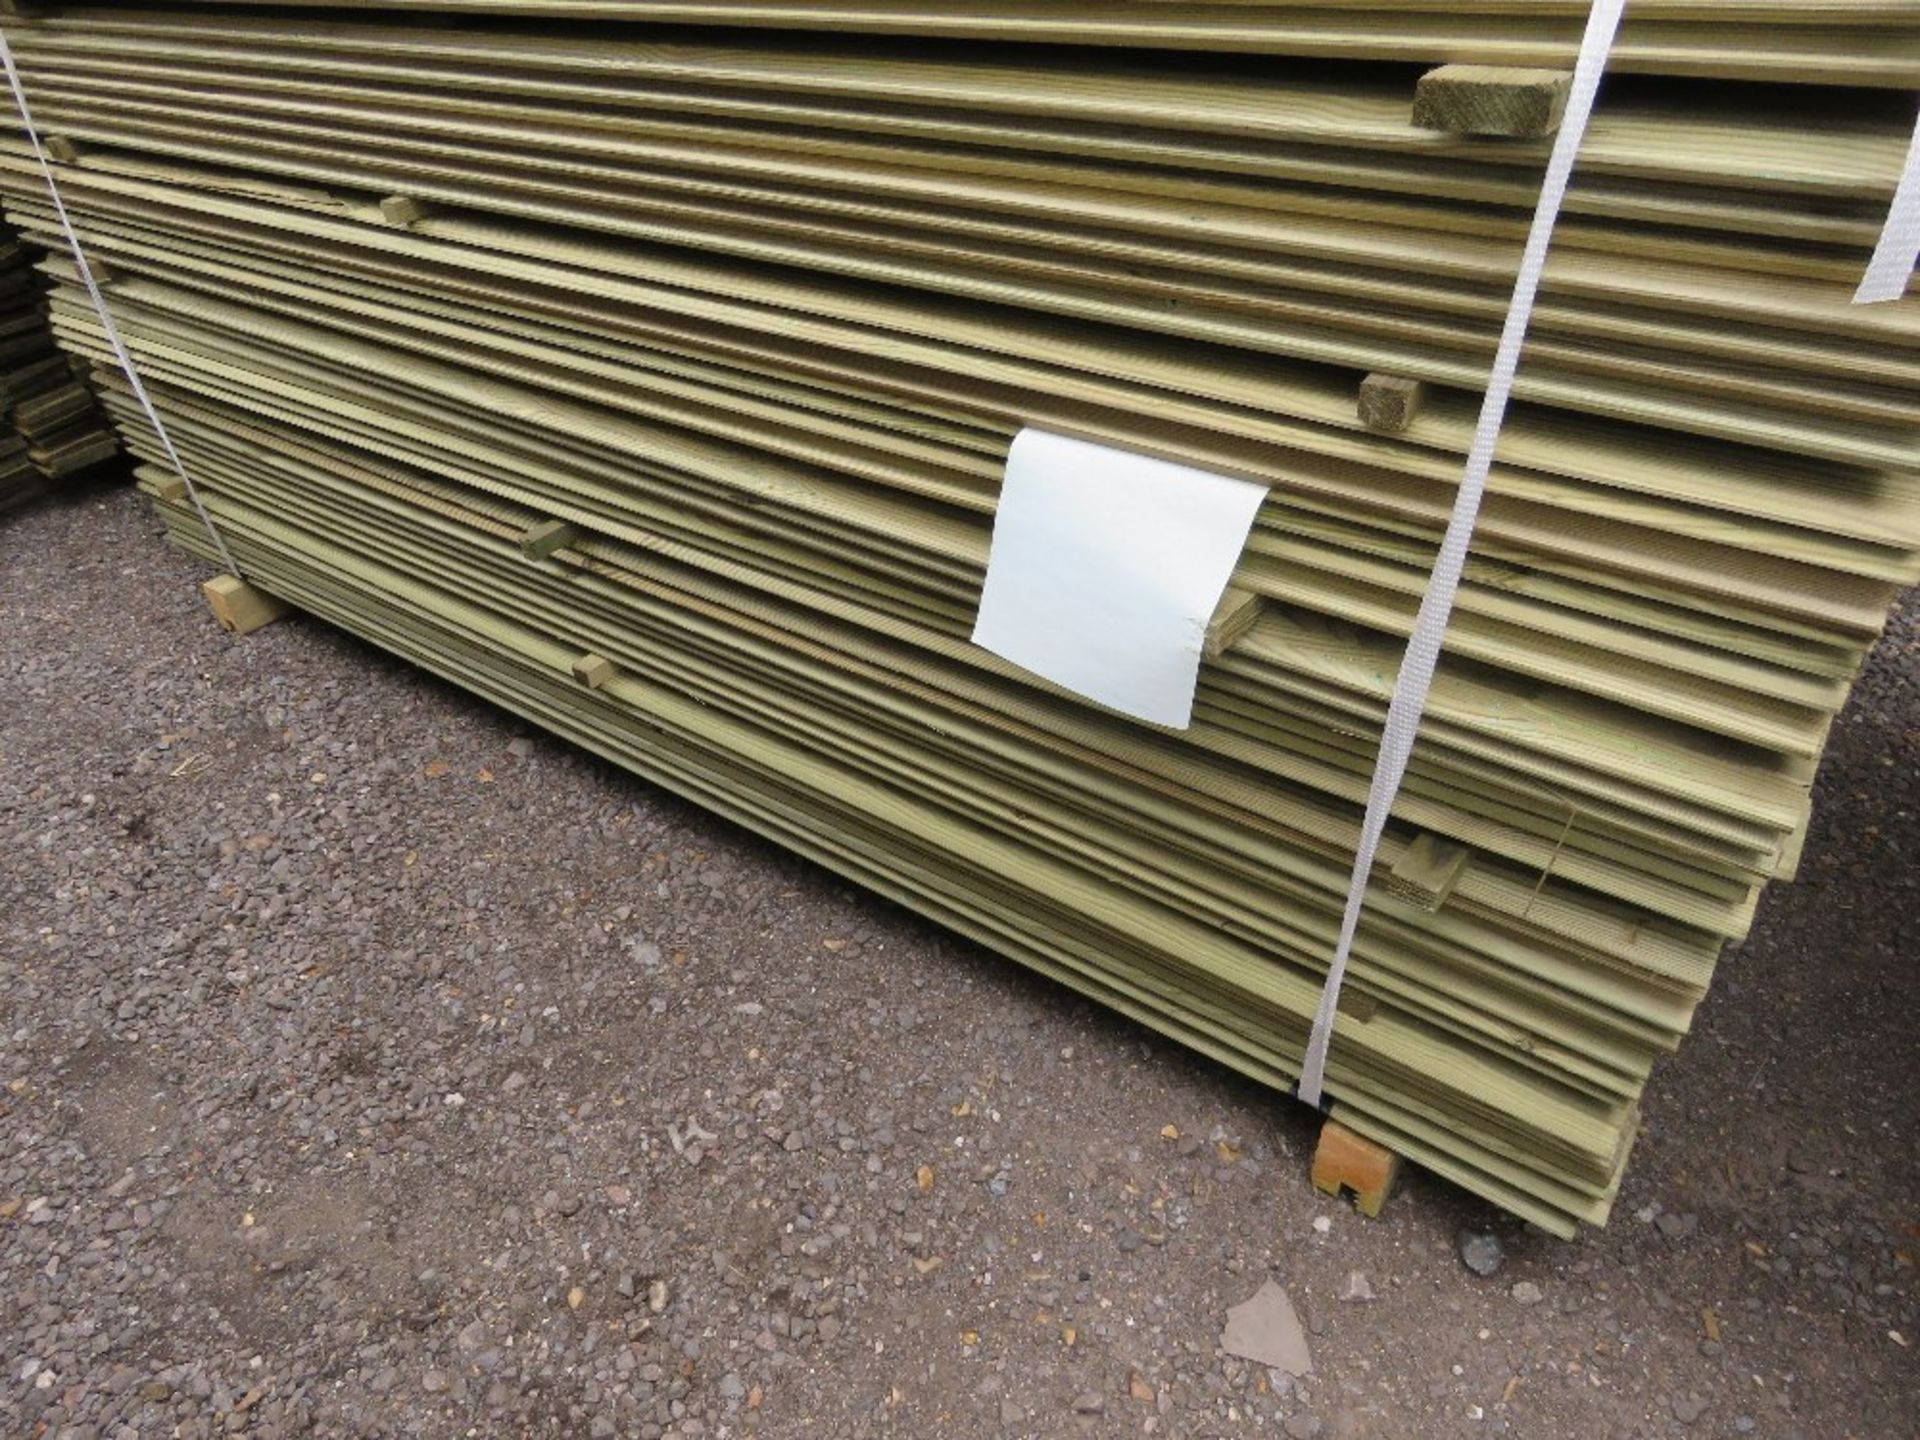 LARGE PACK OF PRESSURE TREATED SHIPLAP FENCE CLADDING TIMBER BOARDS. 1.83M LENGTH X 100MM WIDTH APPR - Image 4 of 4